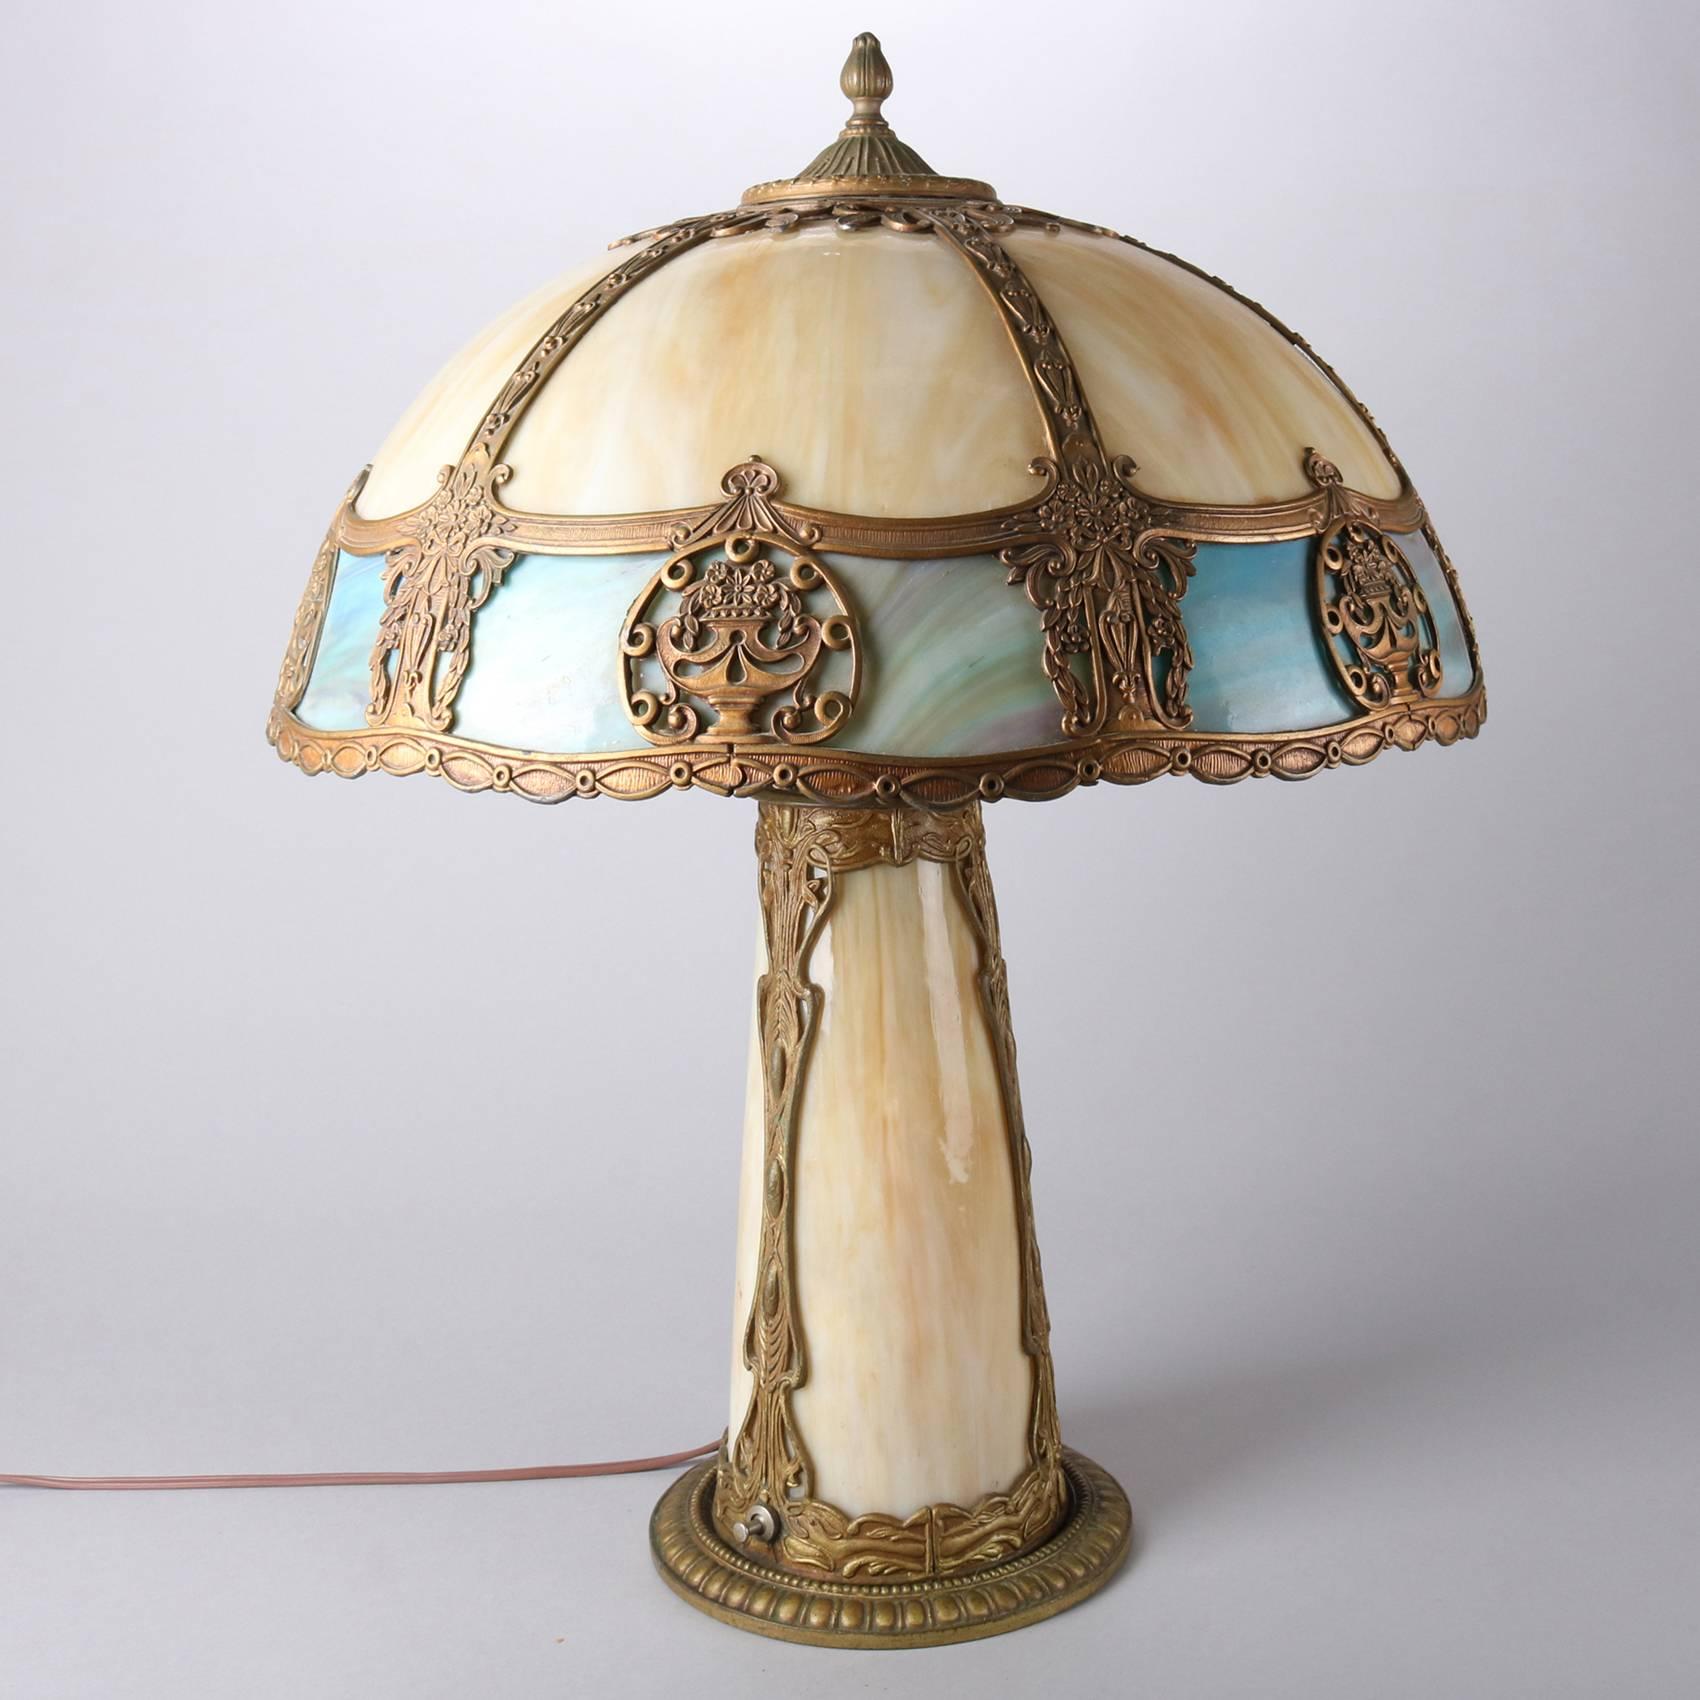 Antique Arts & Crafts Mission style Miller school lamp features urn form filigree six panel shade with independently controlled lighted base, newly rewired, early 20th century

Measures- 24